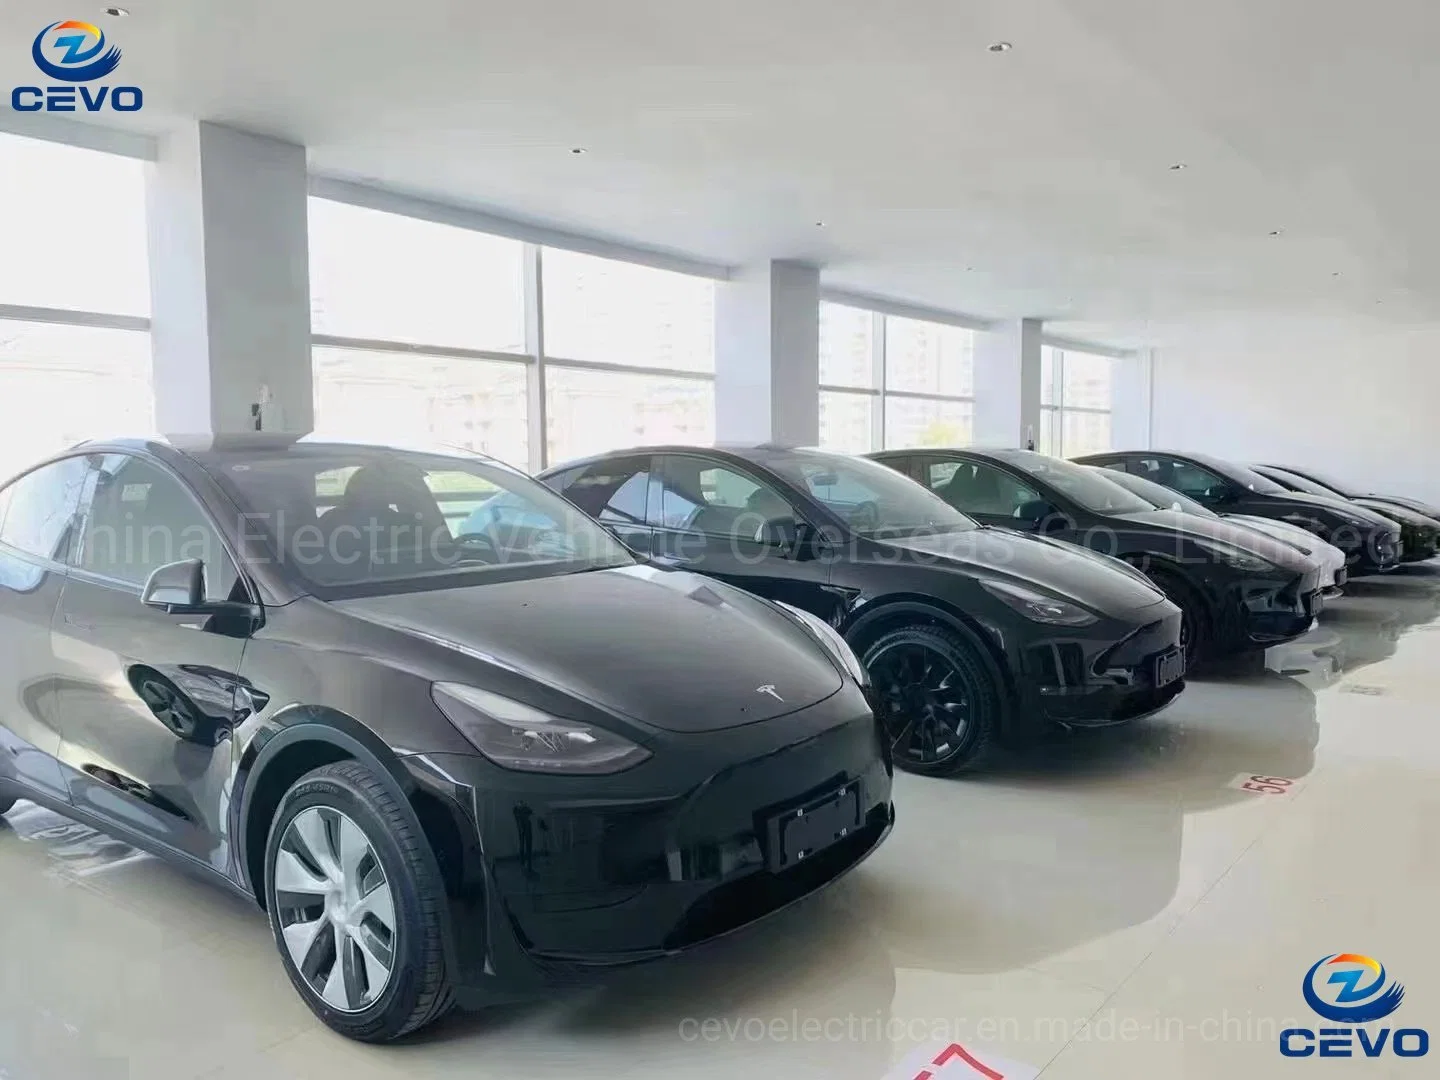 Wholesale Smart Chinese Discount Long Distance Best Value Average Price Cheapest Efficiency Electric Vehicle EV Avaliable Model Y Electric Car for Sale